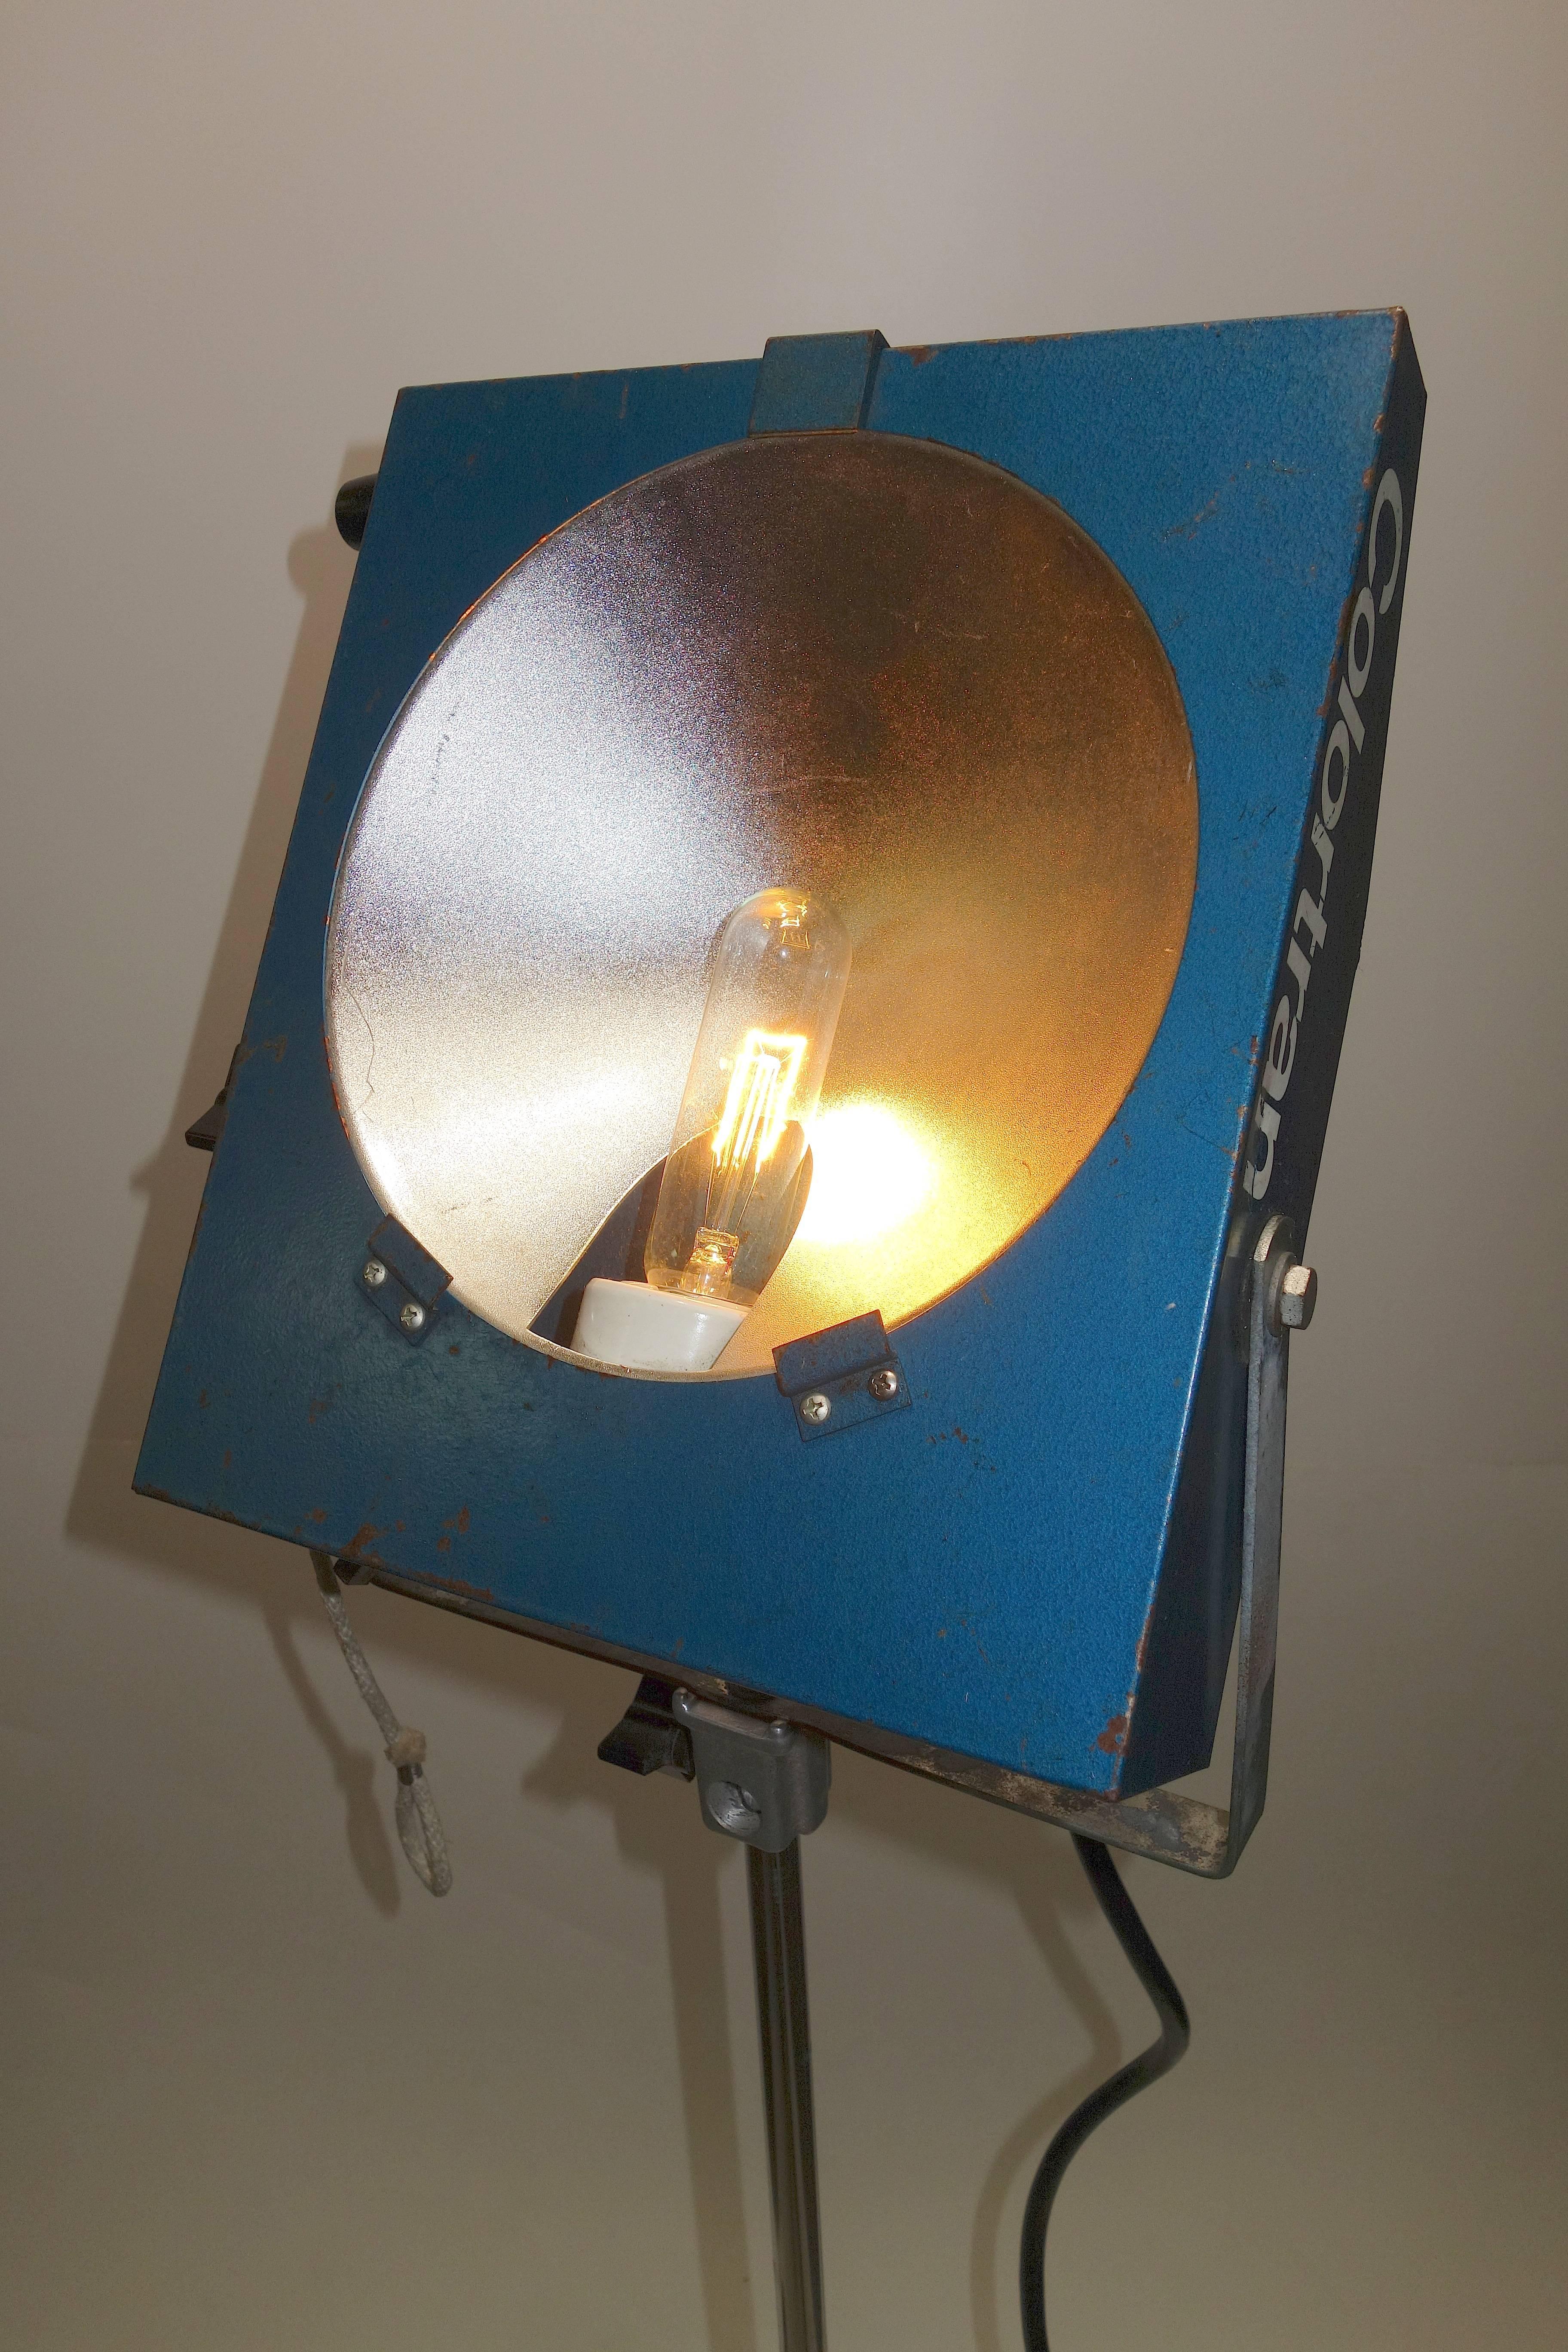 Painted Movie Studio Mini Pan Floor Lamp with Stand, Mid-20th Working Orig. ON SALE. For Sale